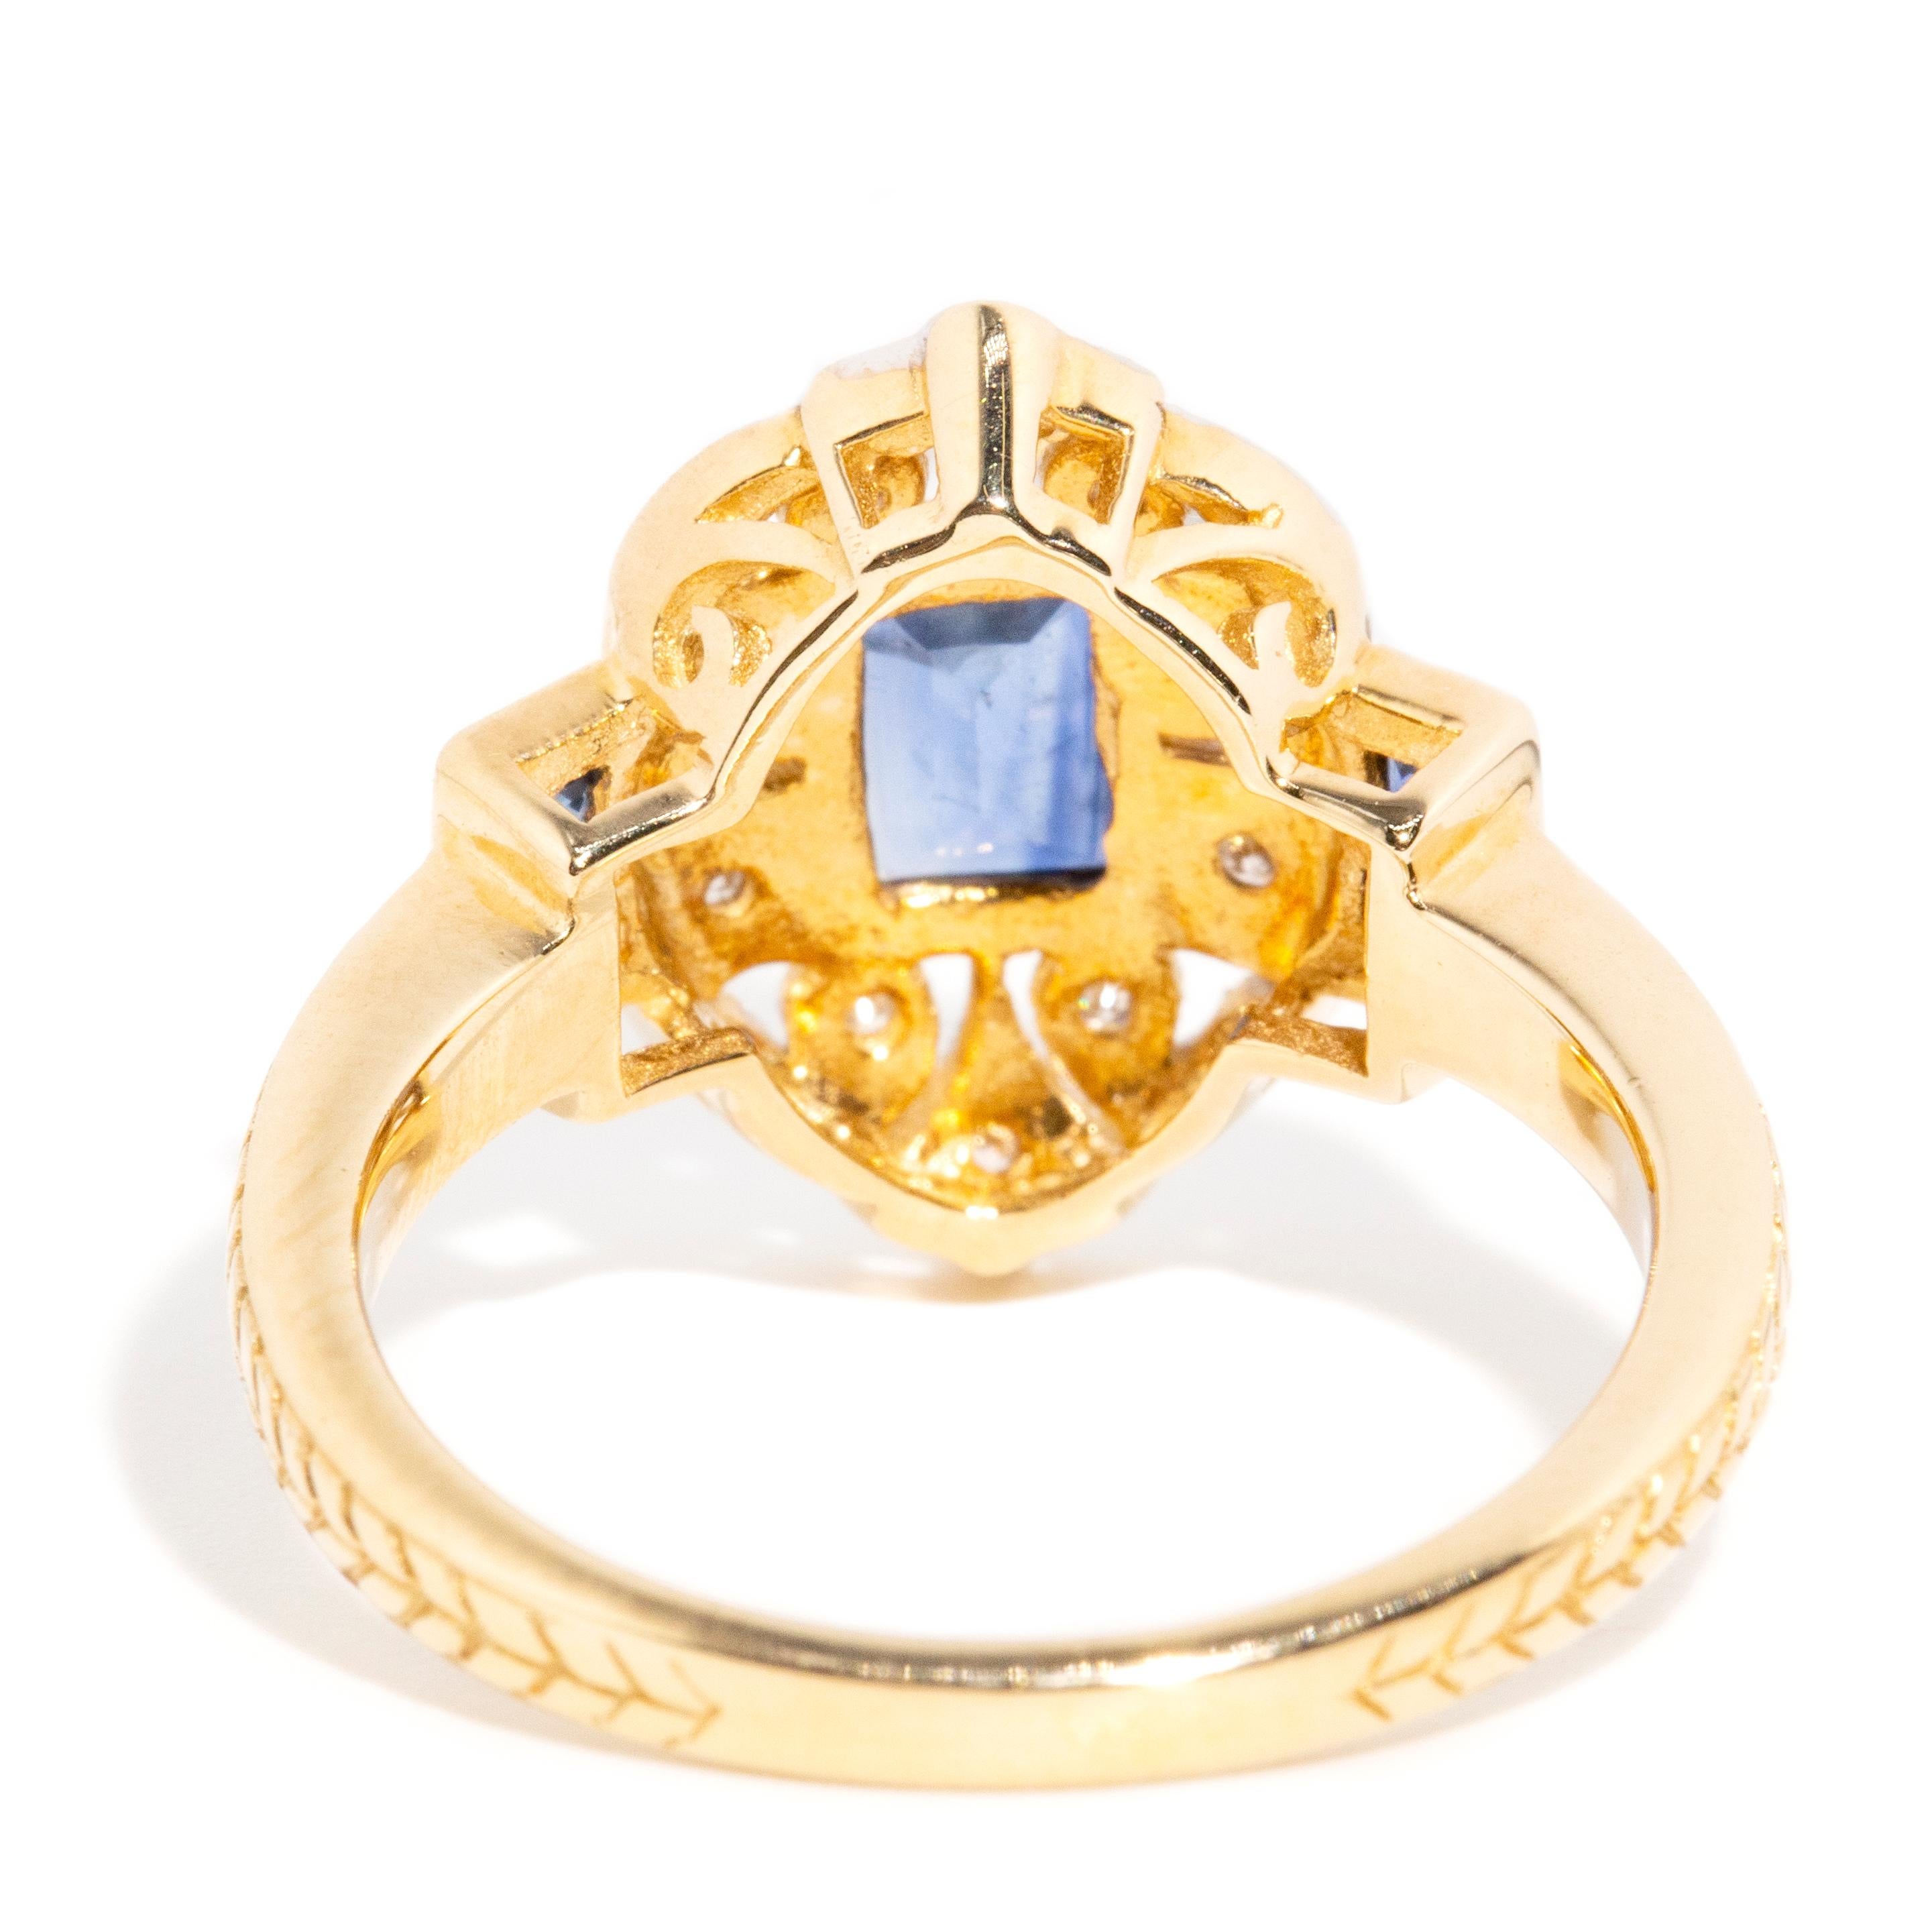 Vintage Inspired Deep Blue Baguette Sapphire & Diamond Ring 9 Carat Yellow Gold For Sale 2